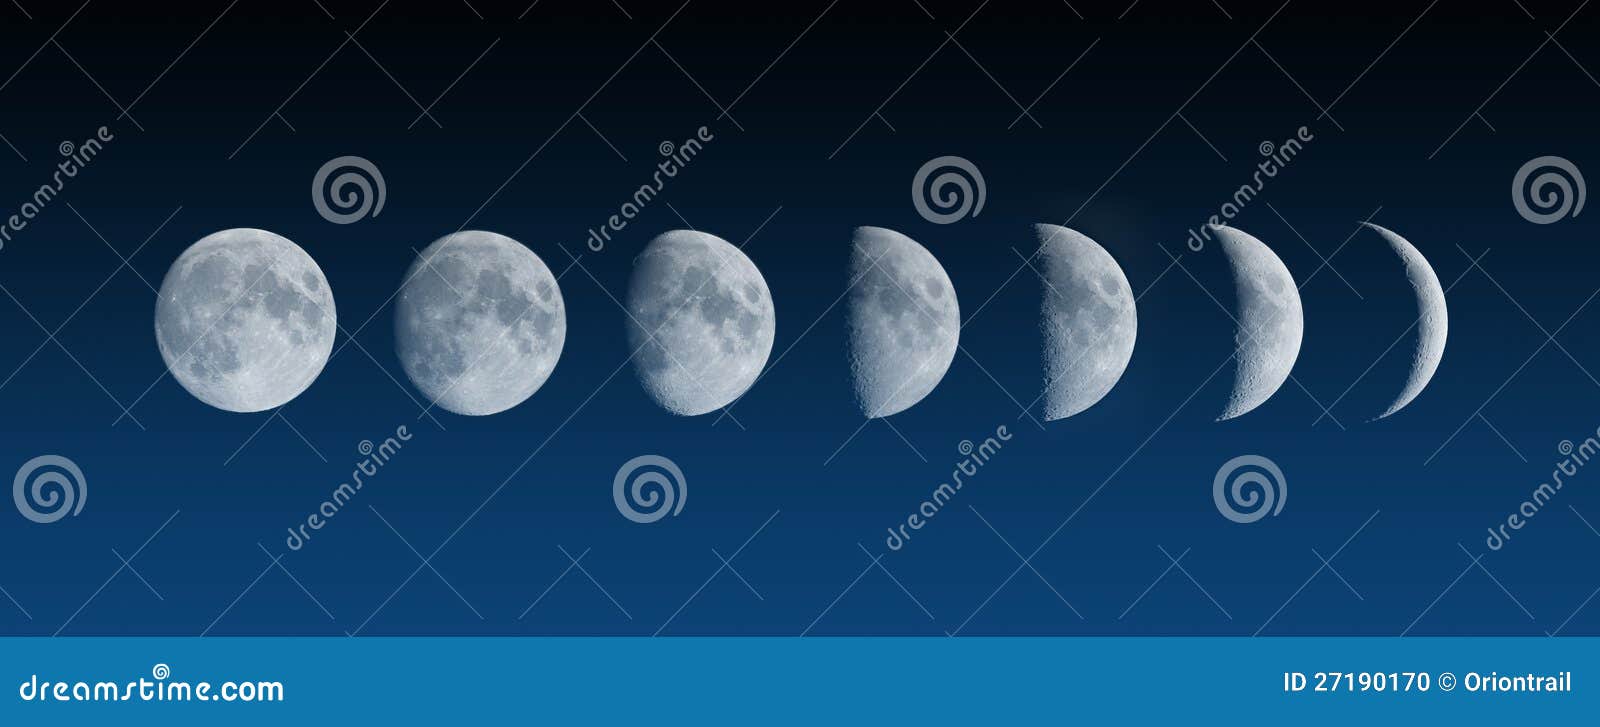 moon phases changes